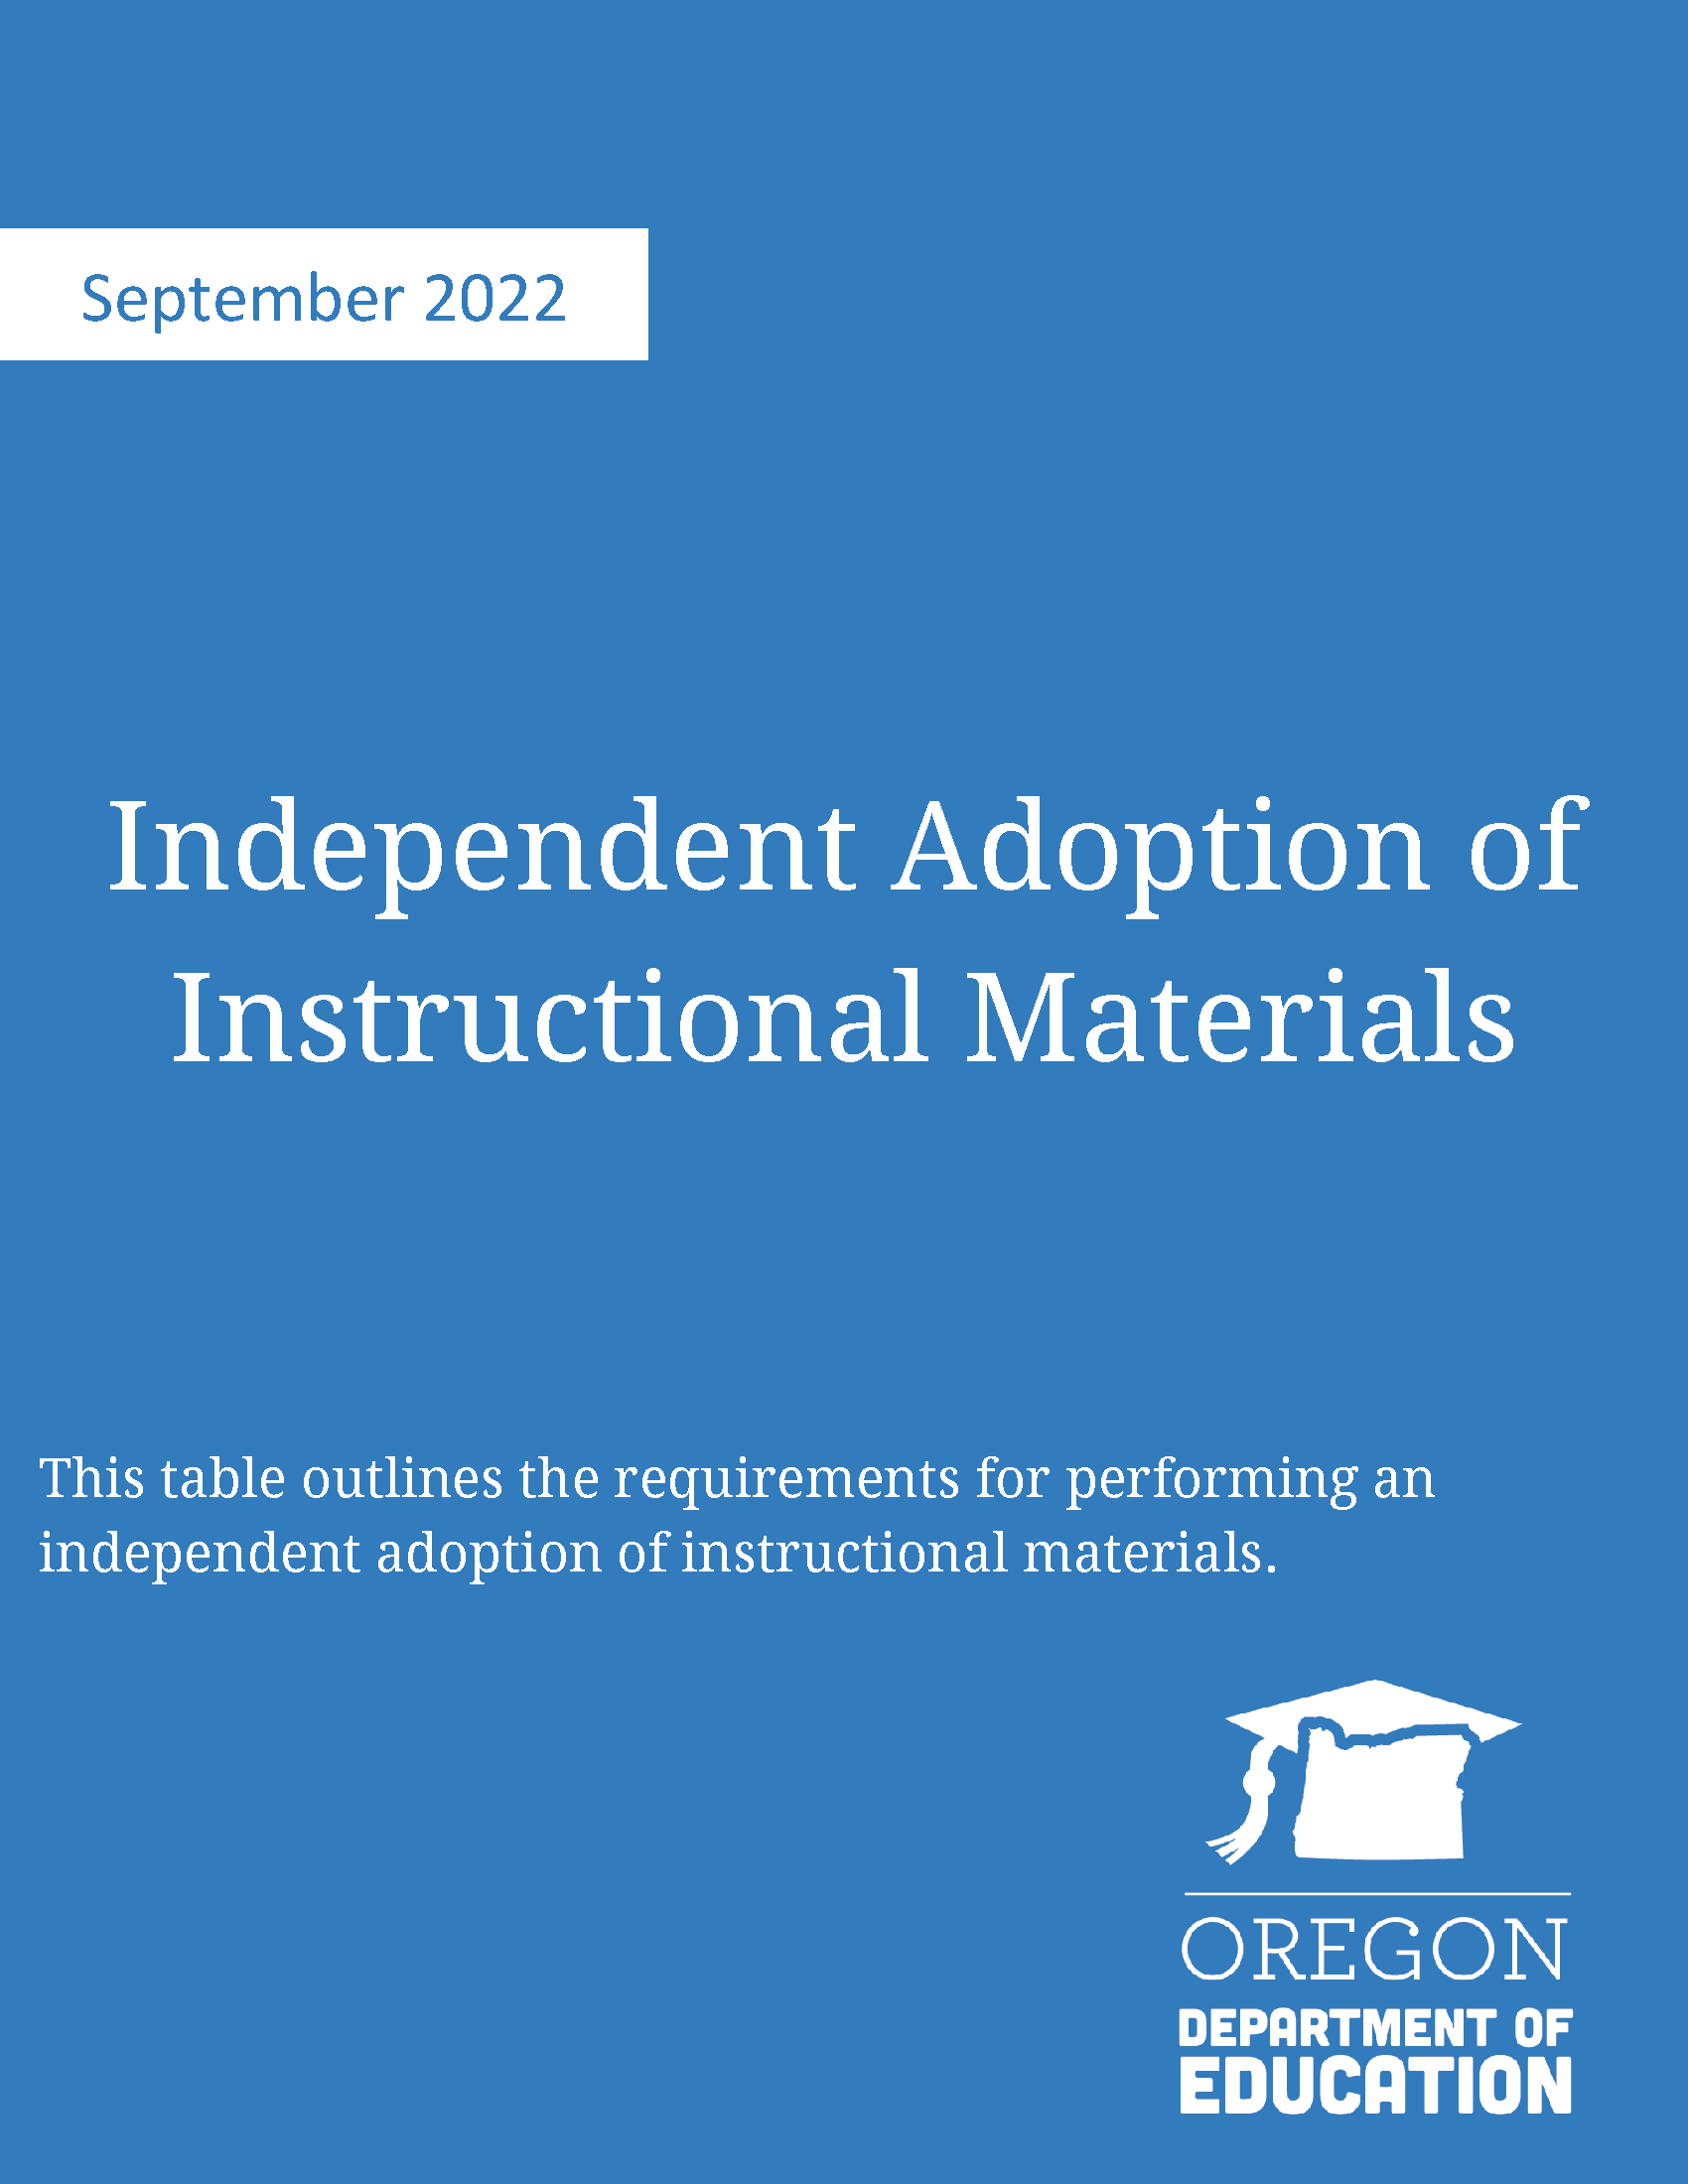 Indpendent Adoption of Instructional Materials